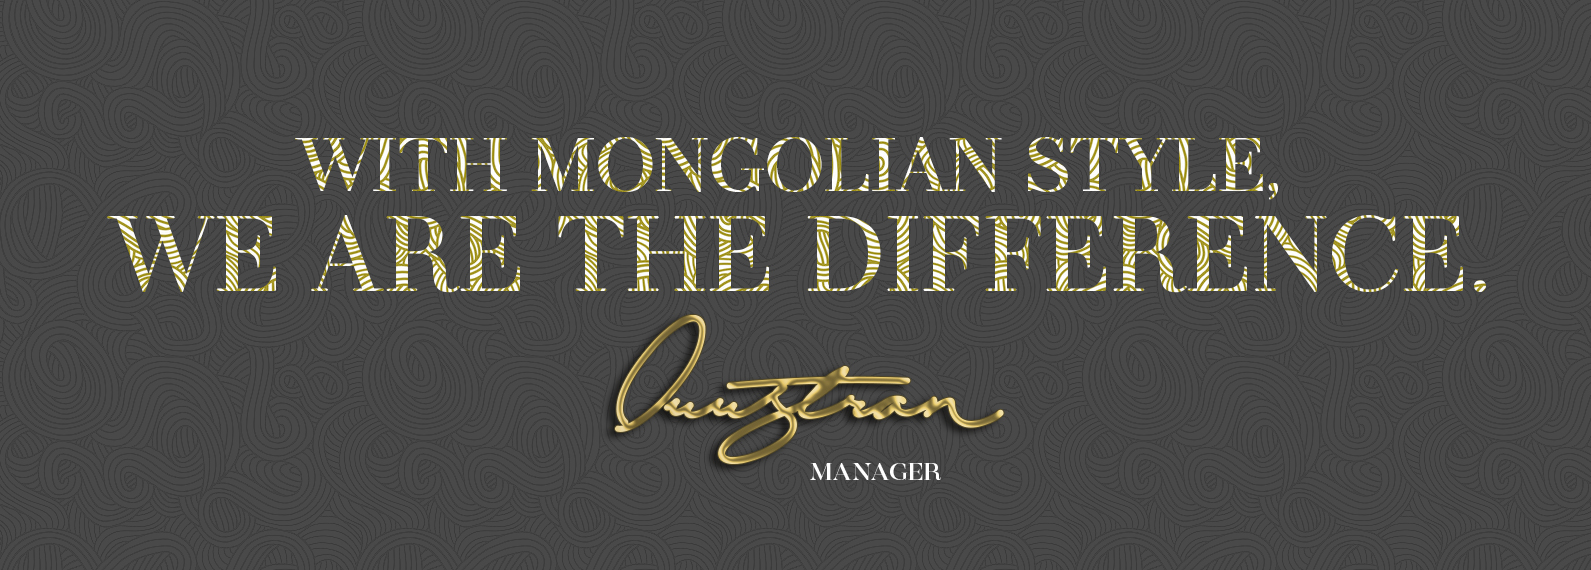 #1 MONGOLIAN BBQ _ WE ARE DIFFERENT_DuyTran